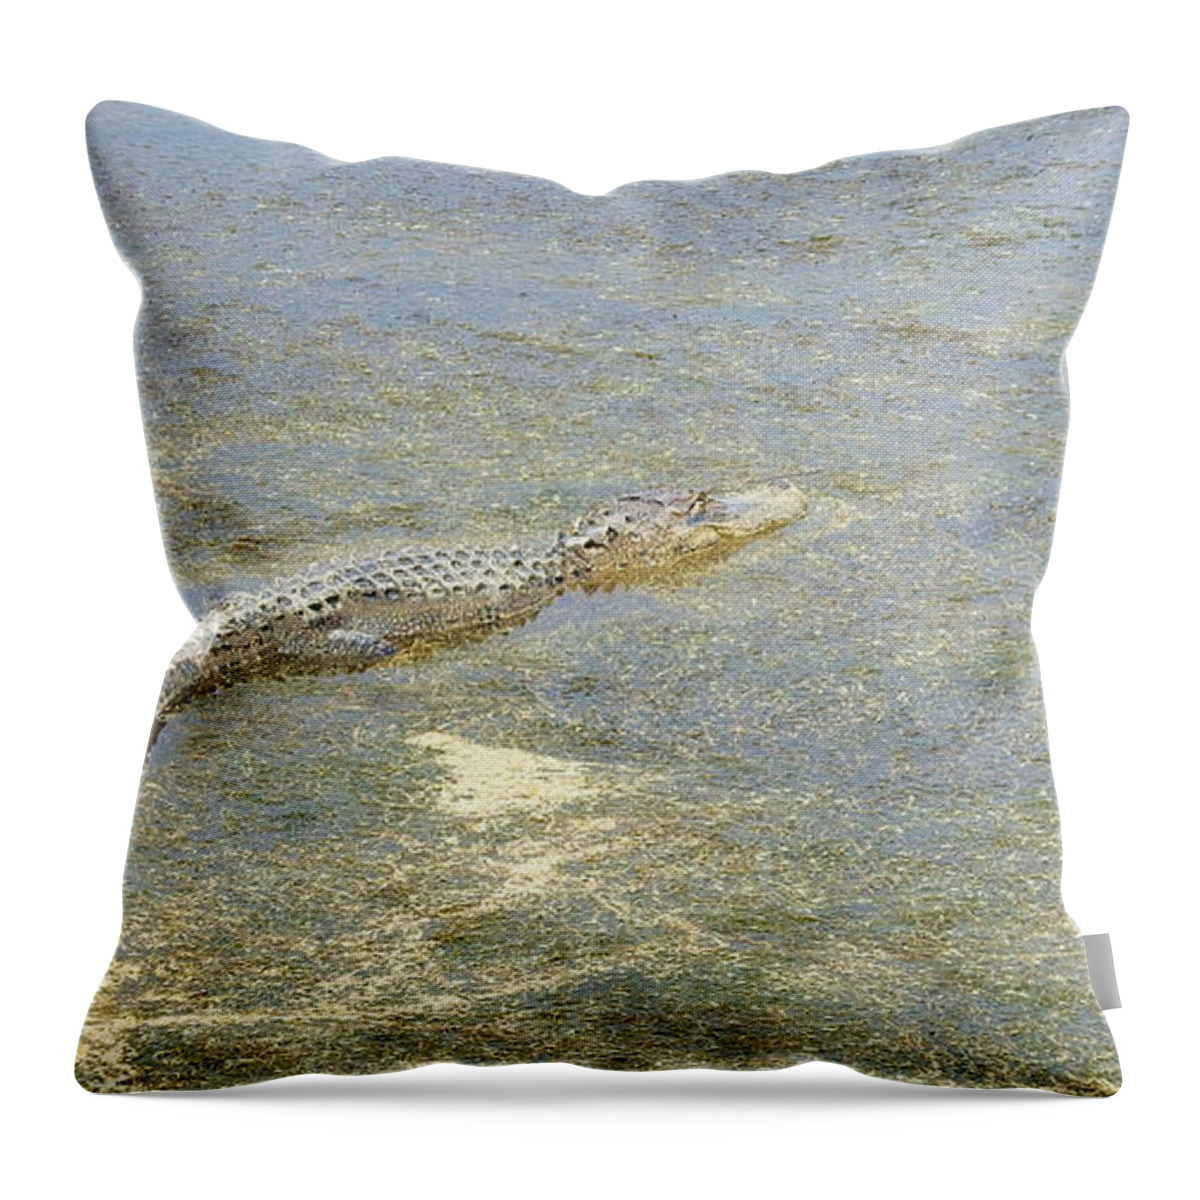 Gator Throw Pillow featuring the photograph Gator #1 by Cathy Harper